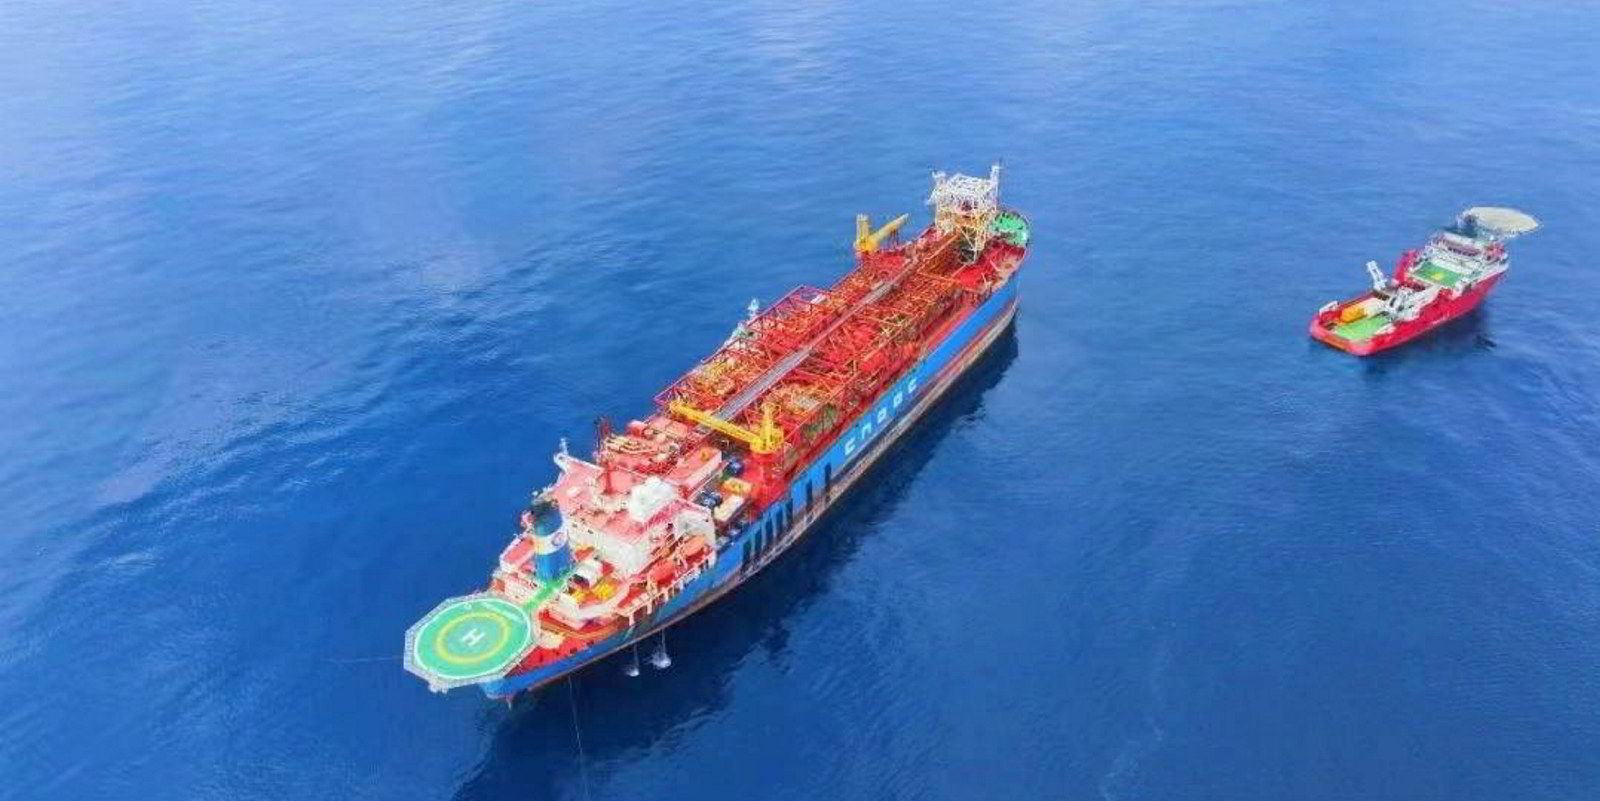 CNOOC Ltd readies new FPSO for South China Sea as old vessel released for scrapping